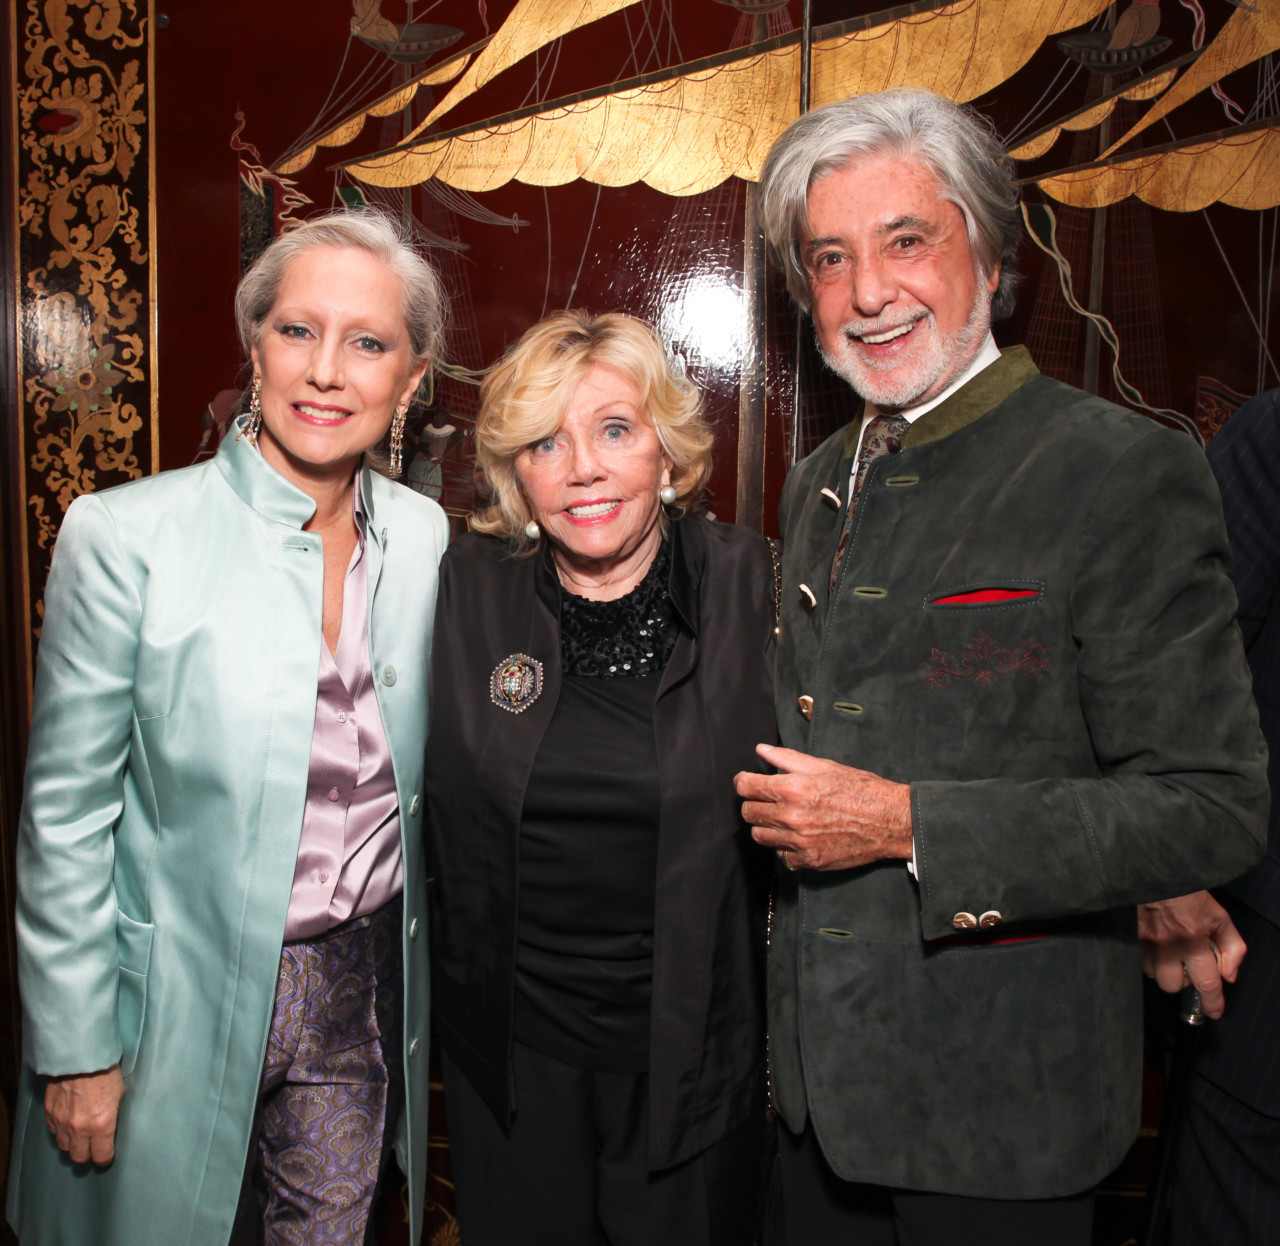 paige rense, center, an older woman at a cocktail party